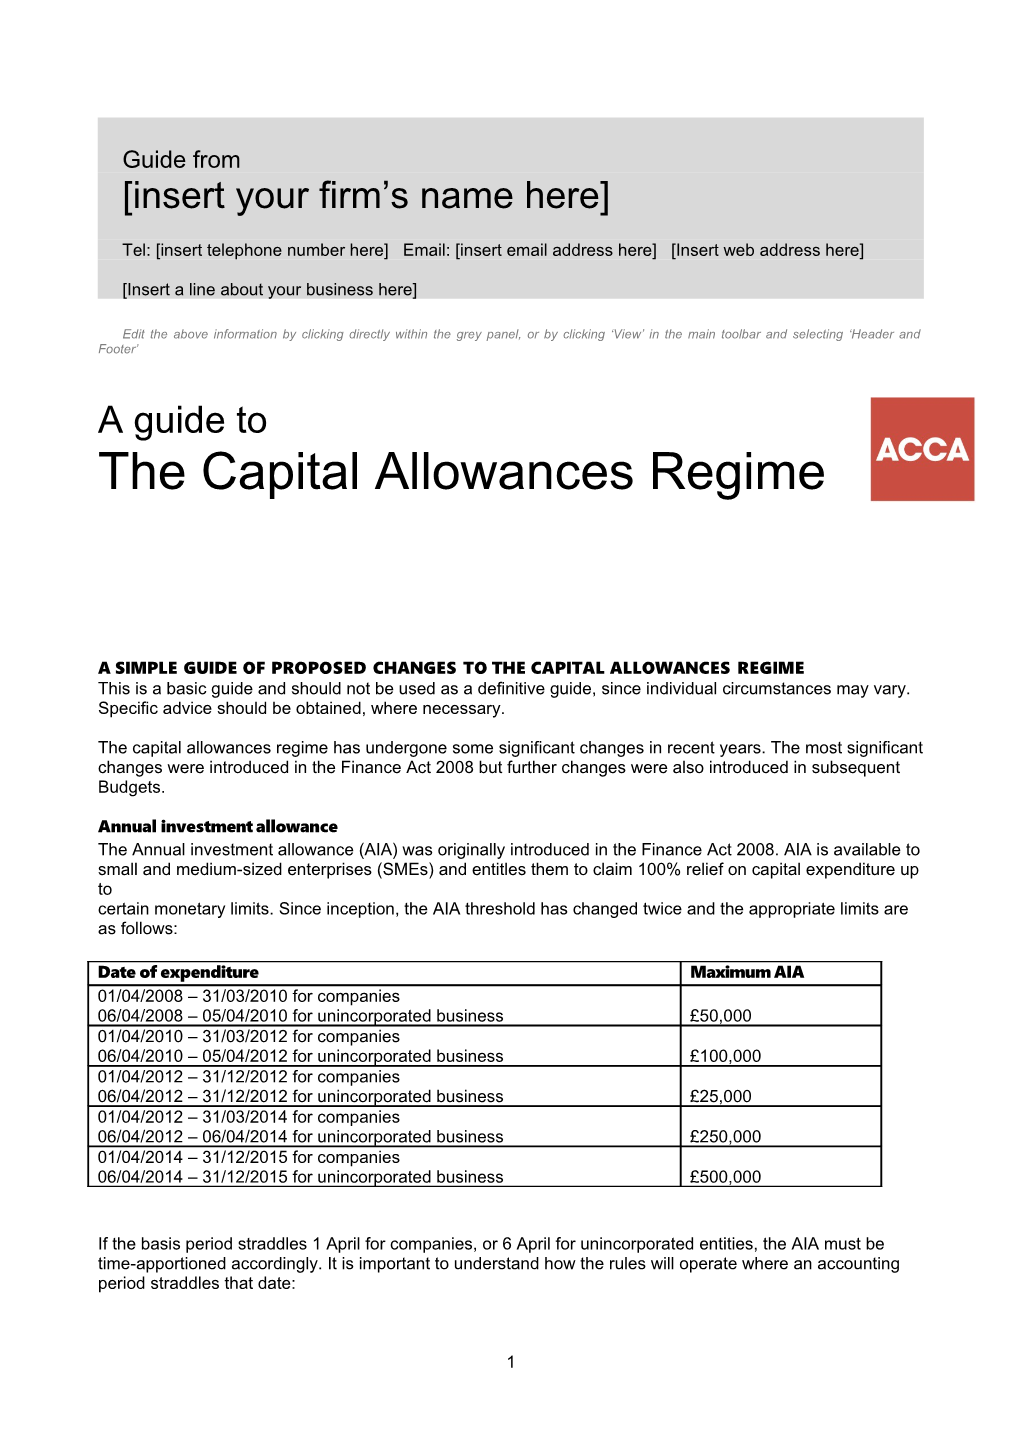 A Simple Guide of Proposed Changes to the Capital Allowances Regime